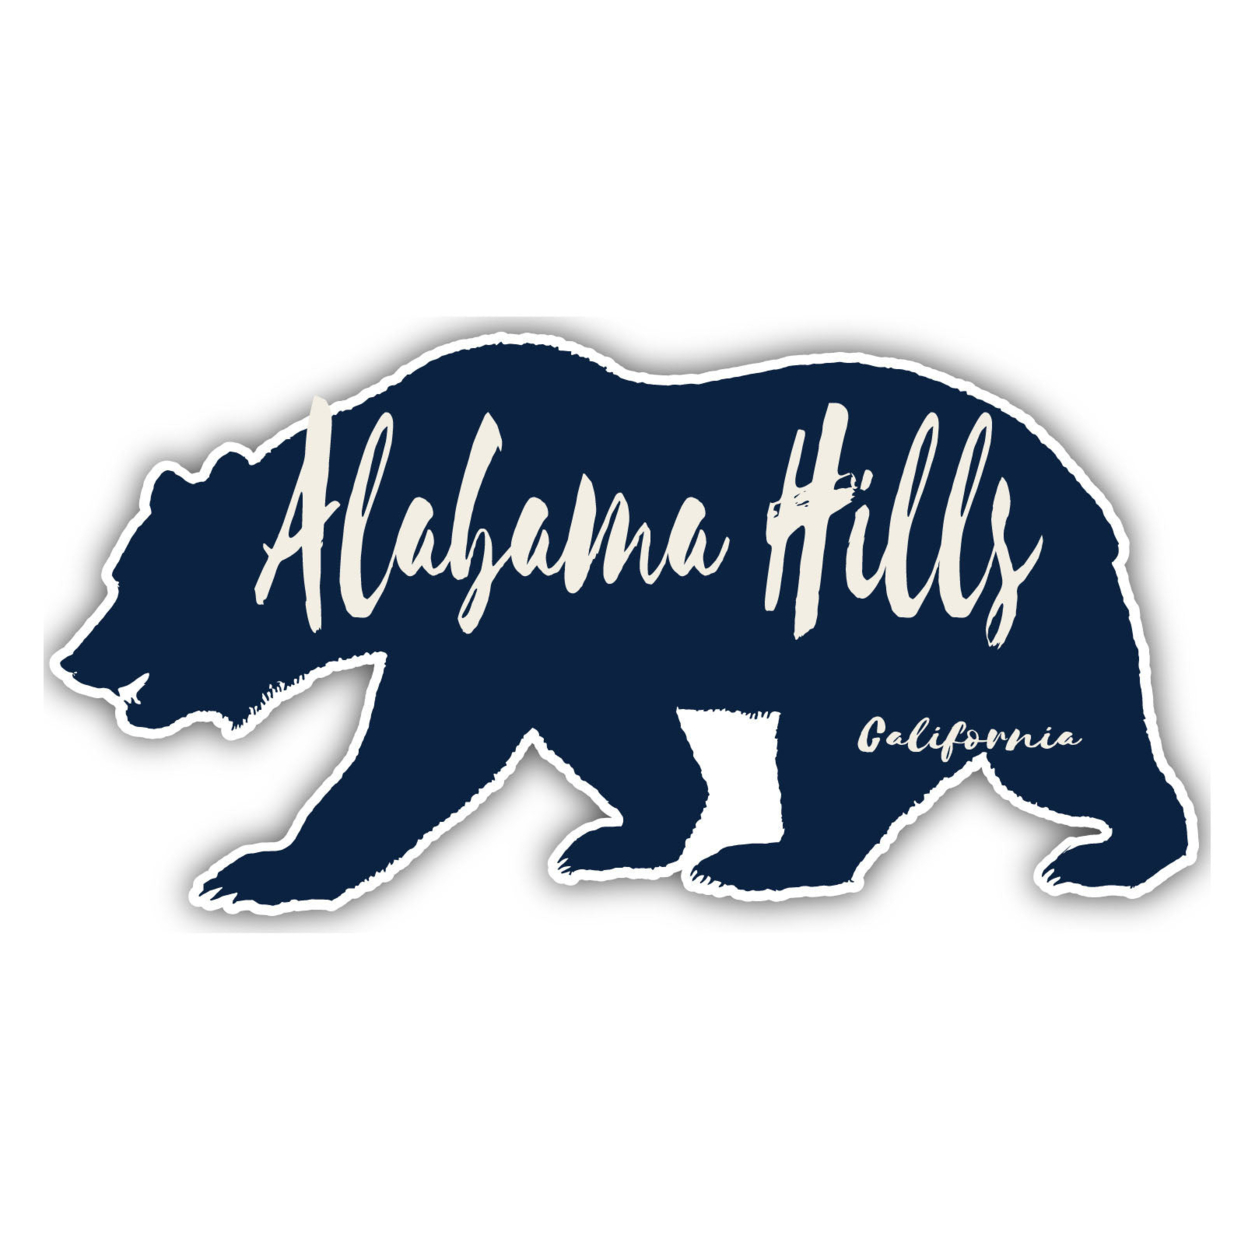 Alabama Hills California Souvenir Decorative Stickers (Choose Theme And Size) - Single Unit, 12-Inch, Great Outdoors